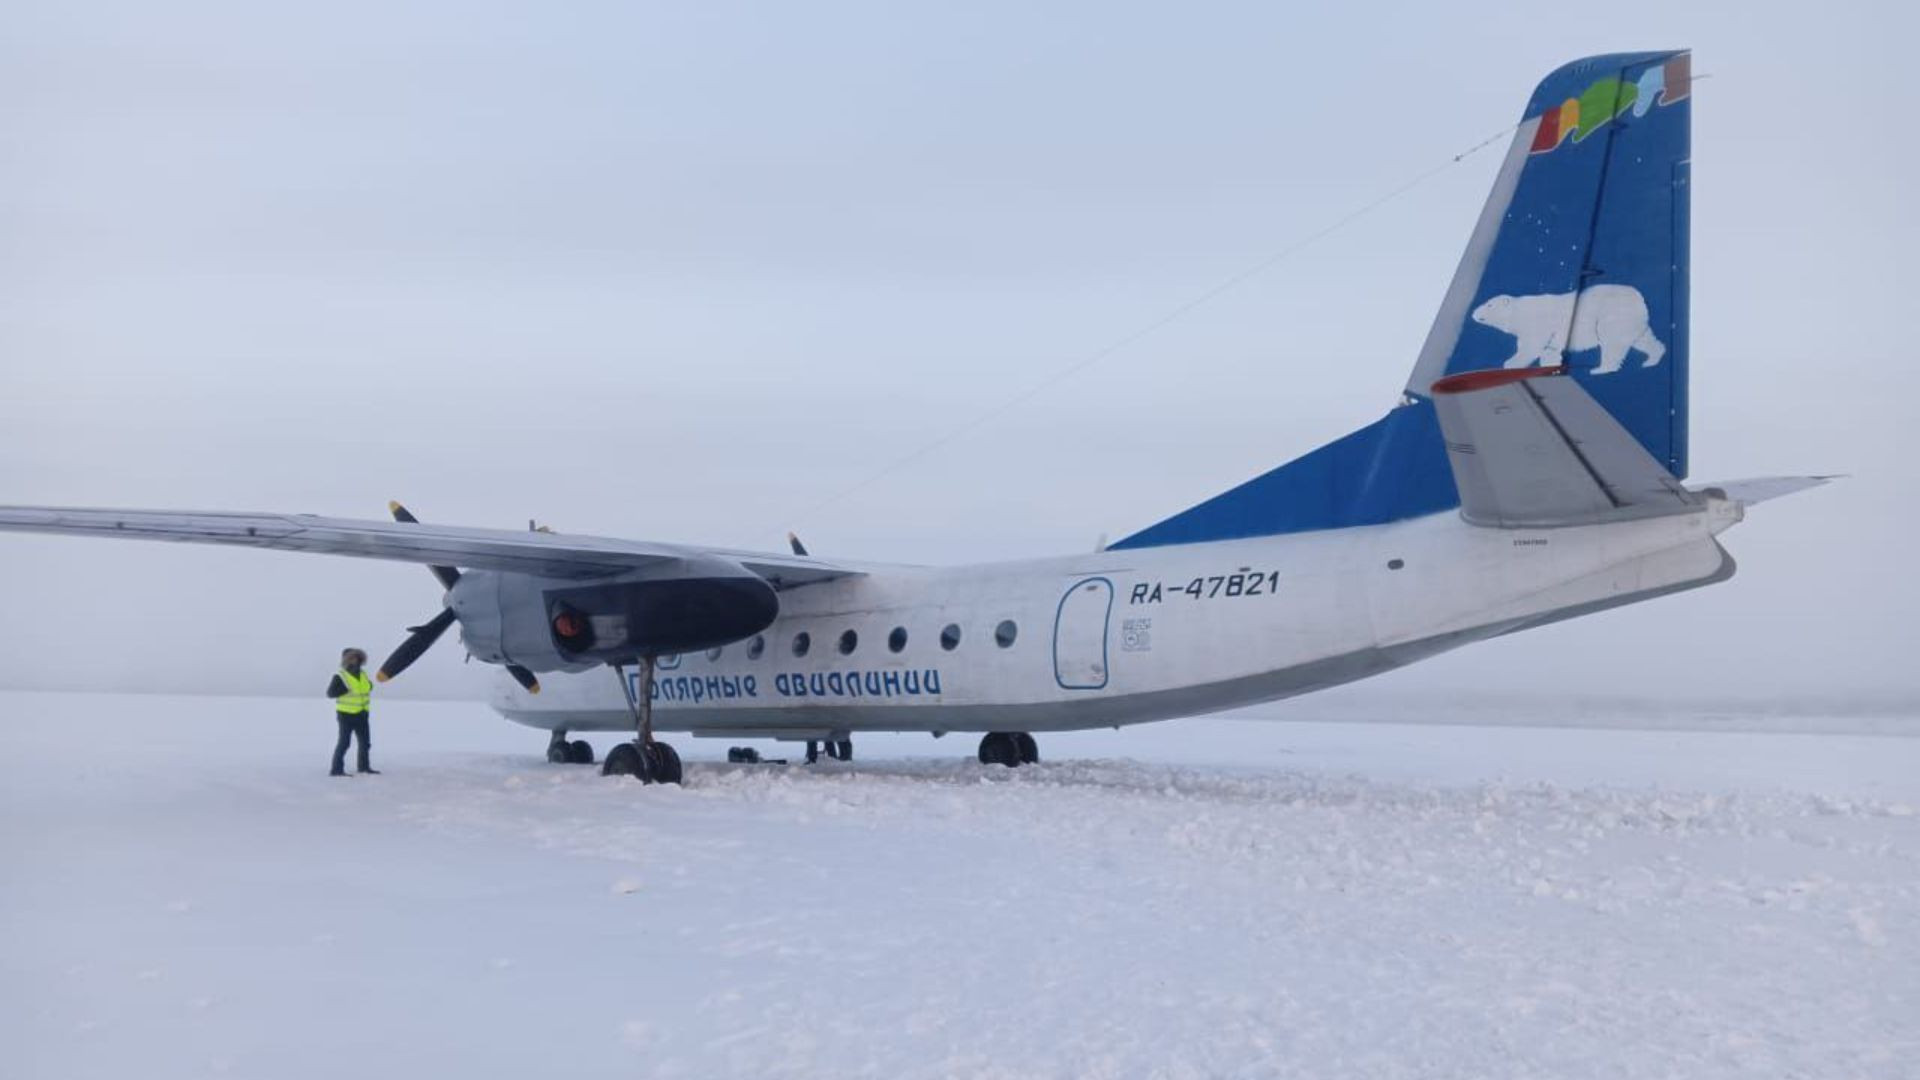 Russian passenger plane landed on a frozen river. Here’s why